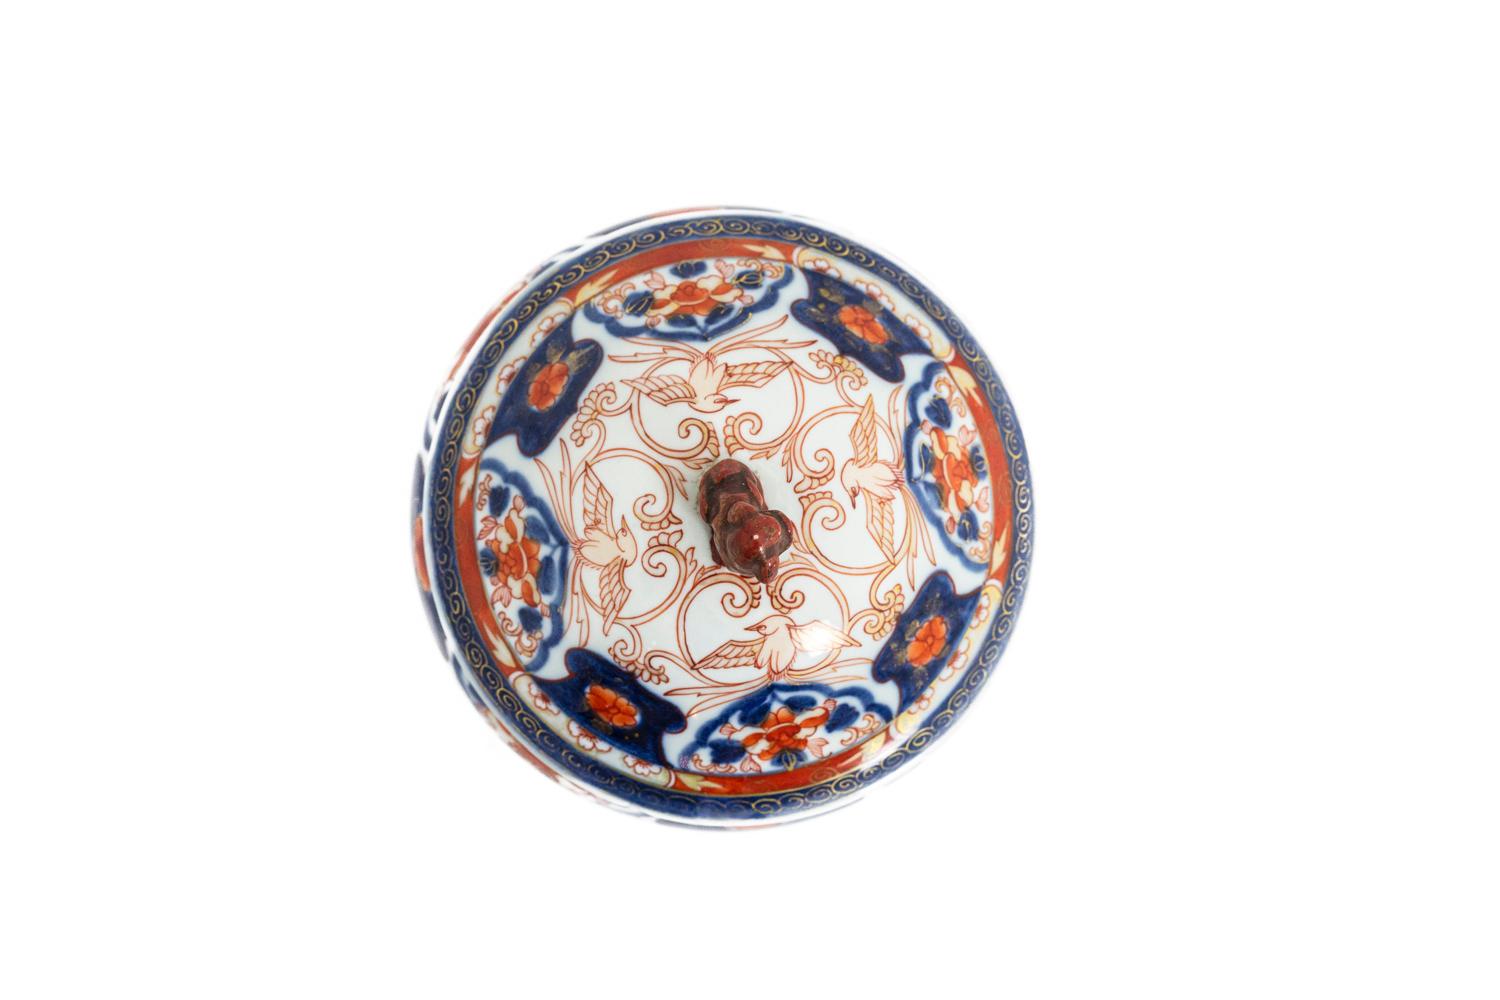 Pair of ovoid shaped lamps. Collar adorned with blue leaves and red, orange and white roses on a white background. Gilded bronze frame. Round quadripod base adorned with leaves and adorned with garlands.